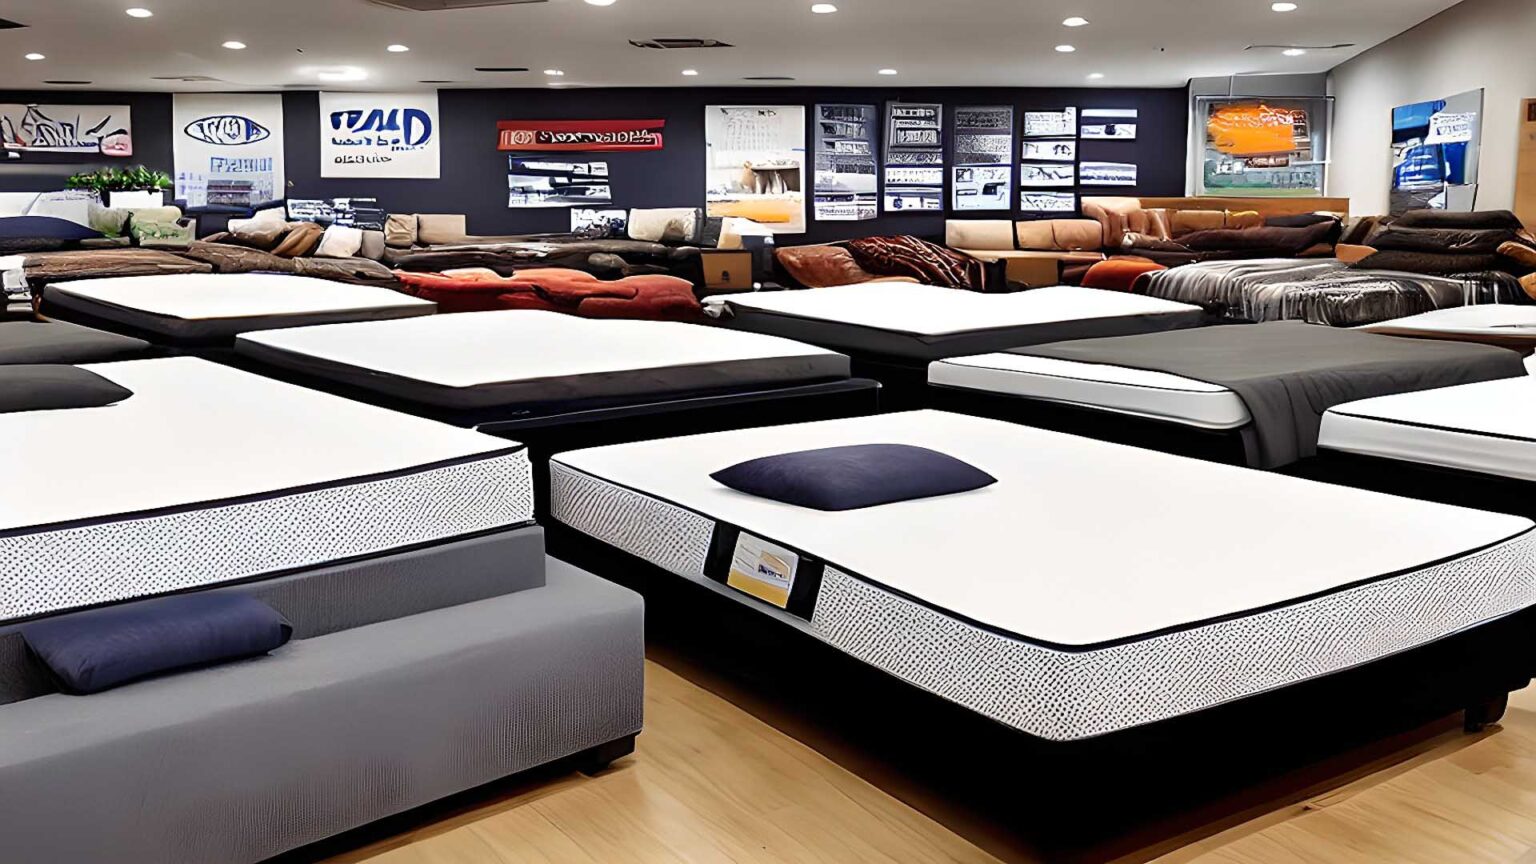 Mattress Stores, mattress dealers, and mattress retailers near me in Richmond Hill, NY